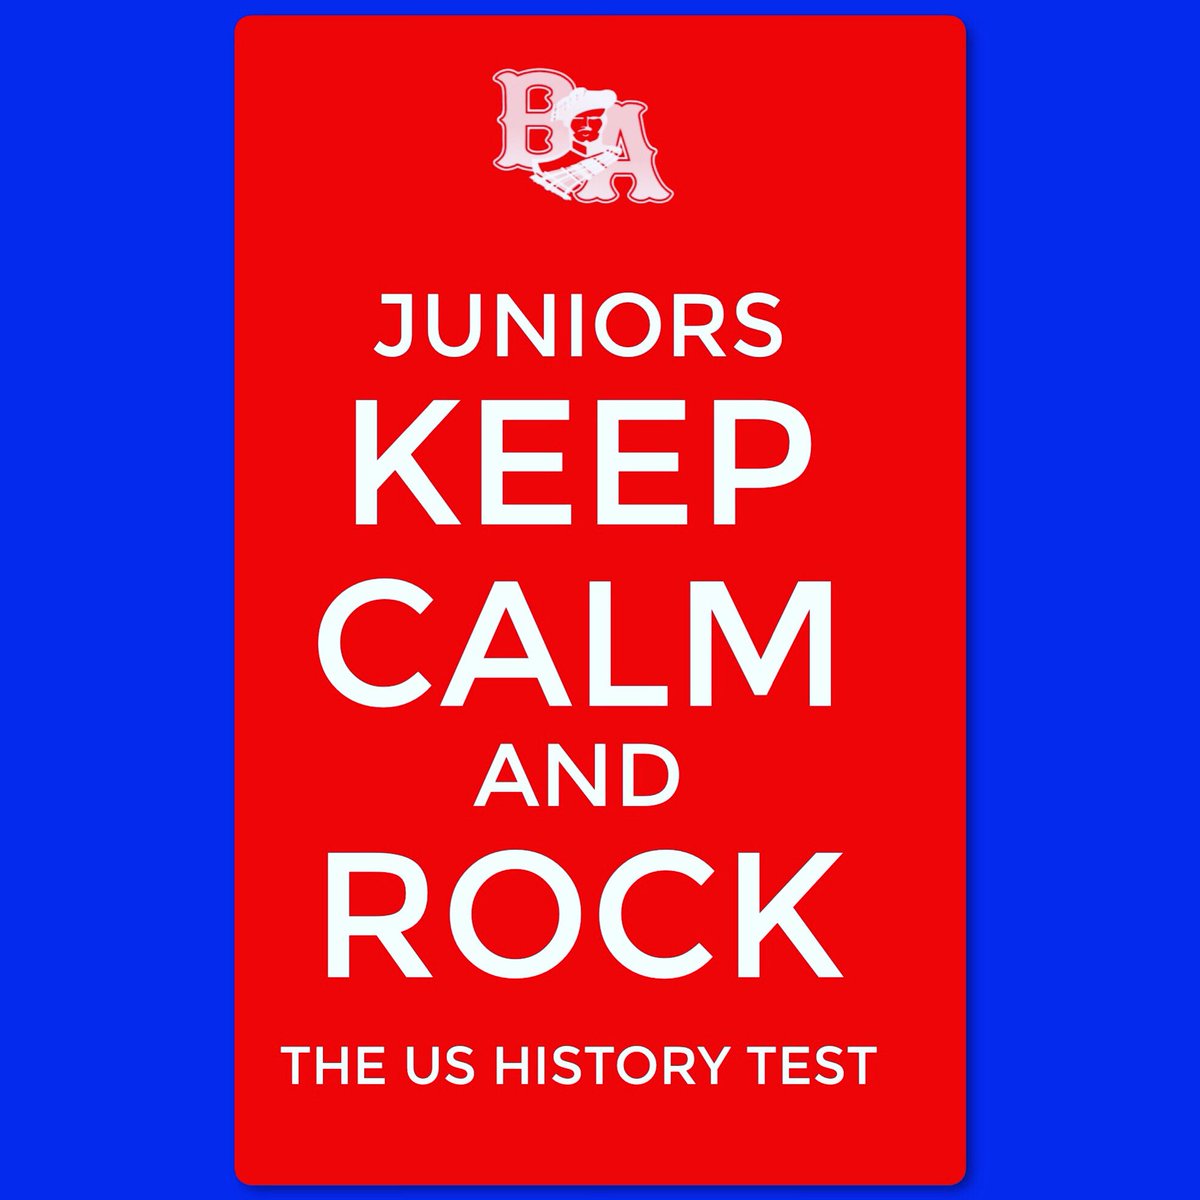 Good luck Juniors taking the US History CBA (Campus Based Assessment) today! “Strive for #45 ⚡️Want more? Hit 54!” @ysletaisd #yisdproud #thedistrict #bigredpride #noexcuses #ushistory #eoc @BelAirHigh @Ms_Lu_Reid